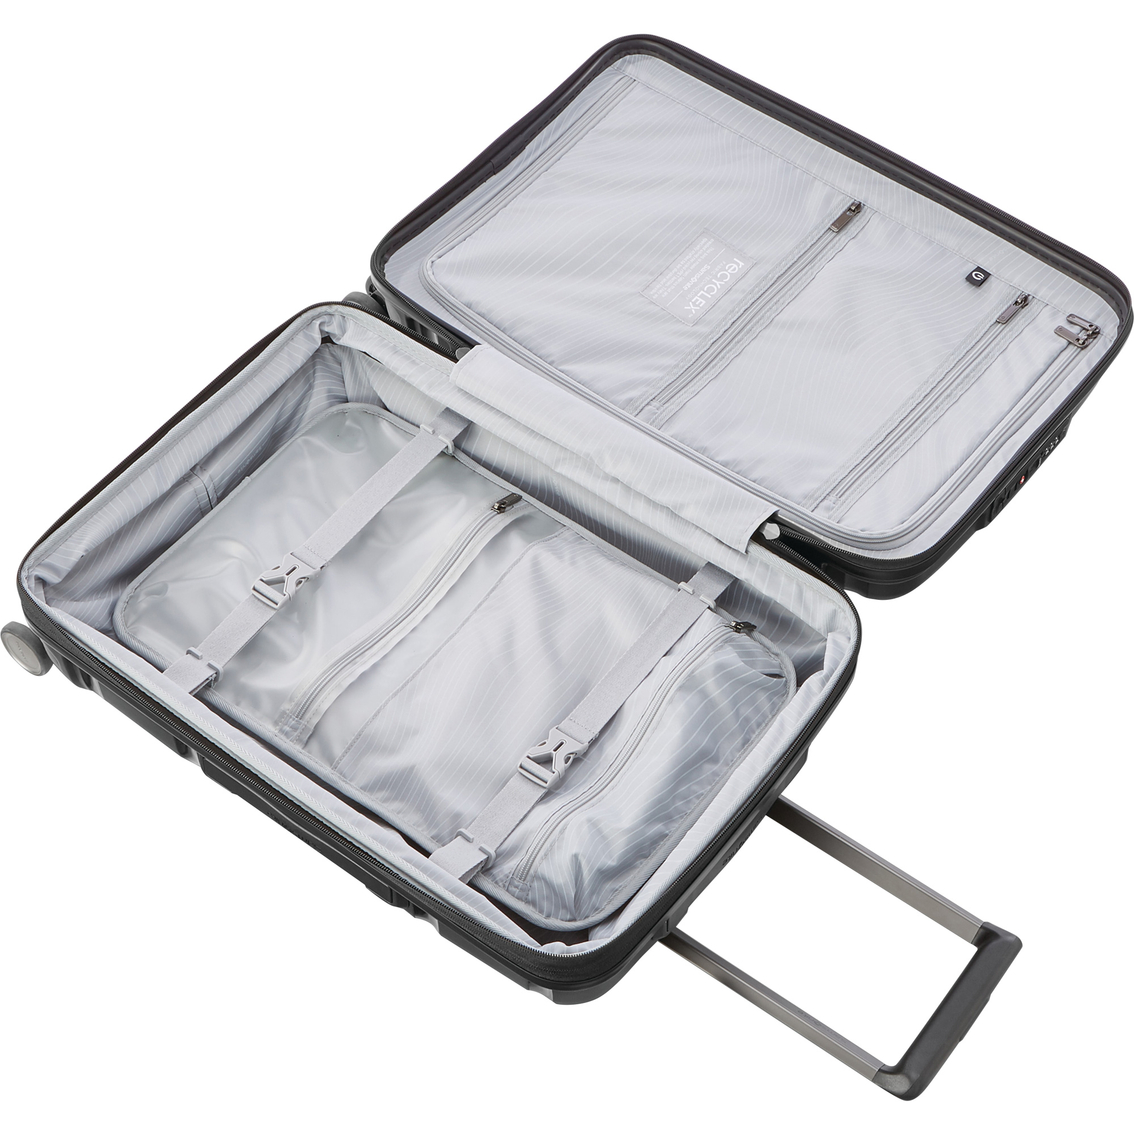 Samsonite Outline Pro Carry On Spinner | Luggage | Clothing ...